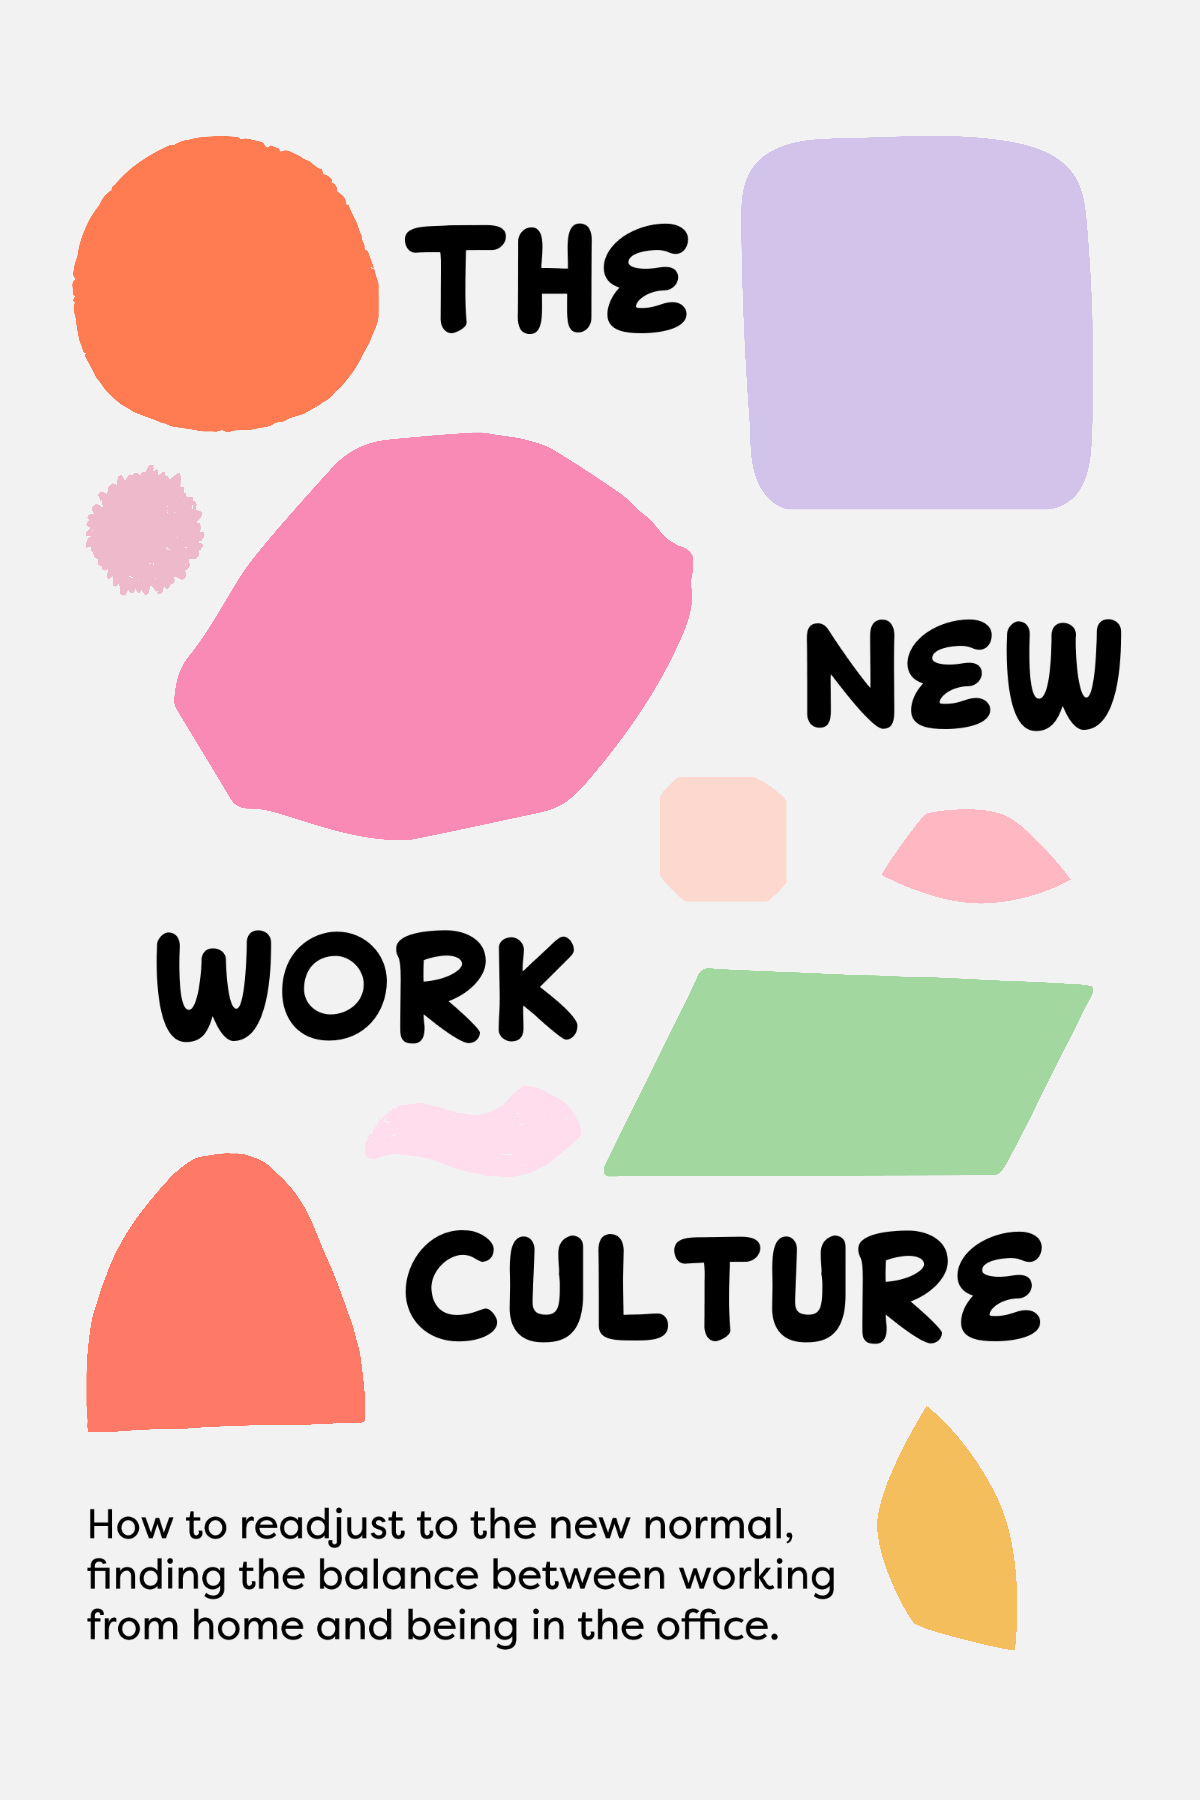 Colorful The New Work Culture - Pinterest Post New Work The Culture How to readjust to the new normal, finding the balance between working from home and being in the office.